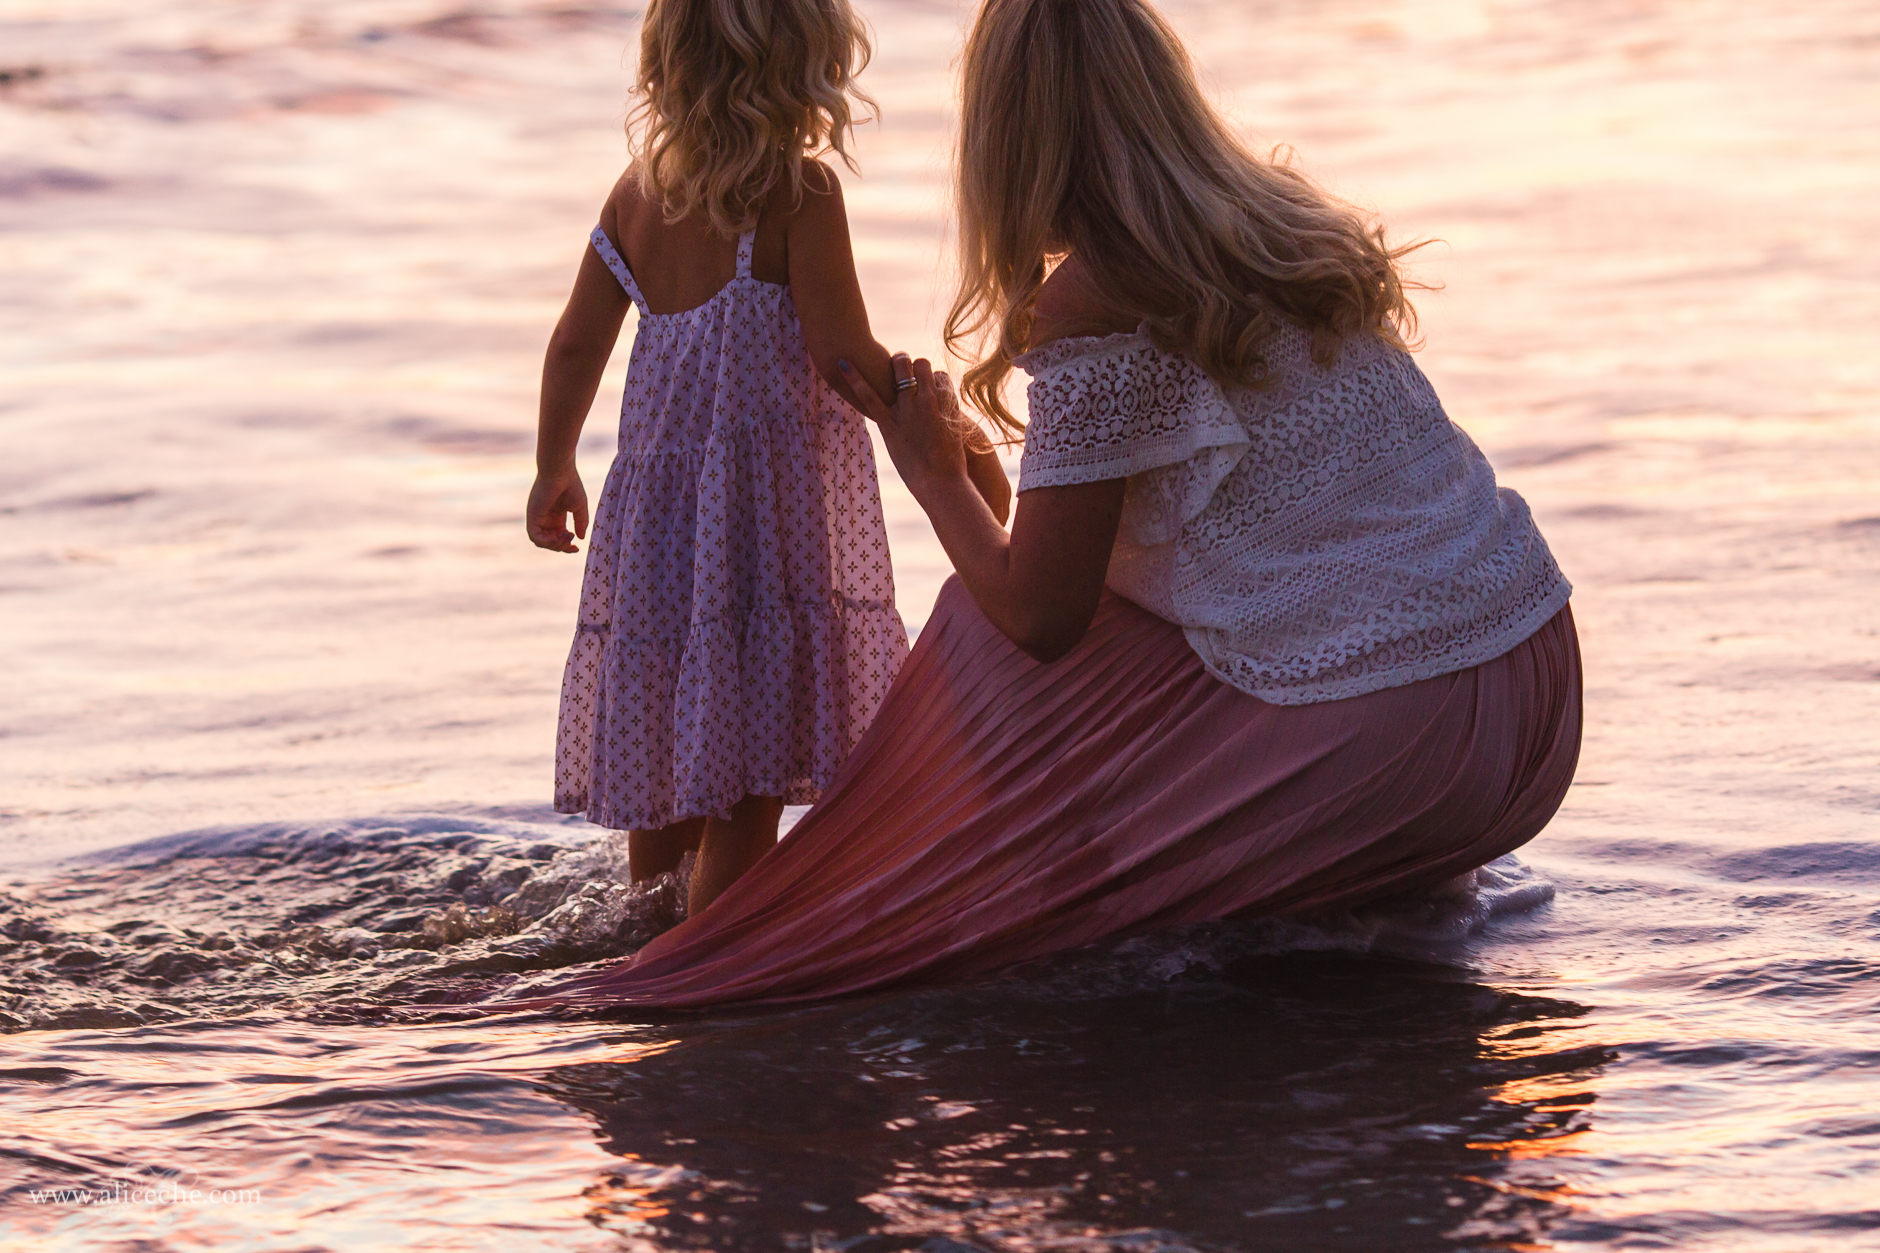 alice-che-photography-blair-thurston-retreat-malibu-family-session-mom-and-daughter-in-the-water